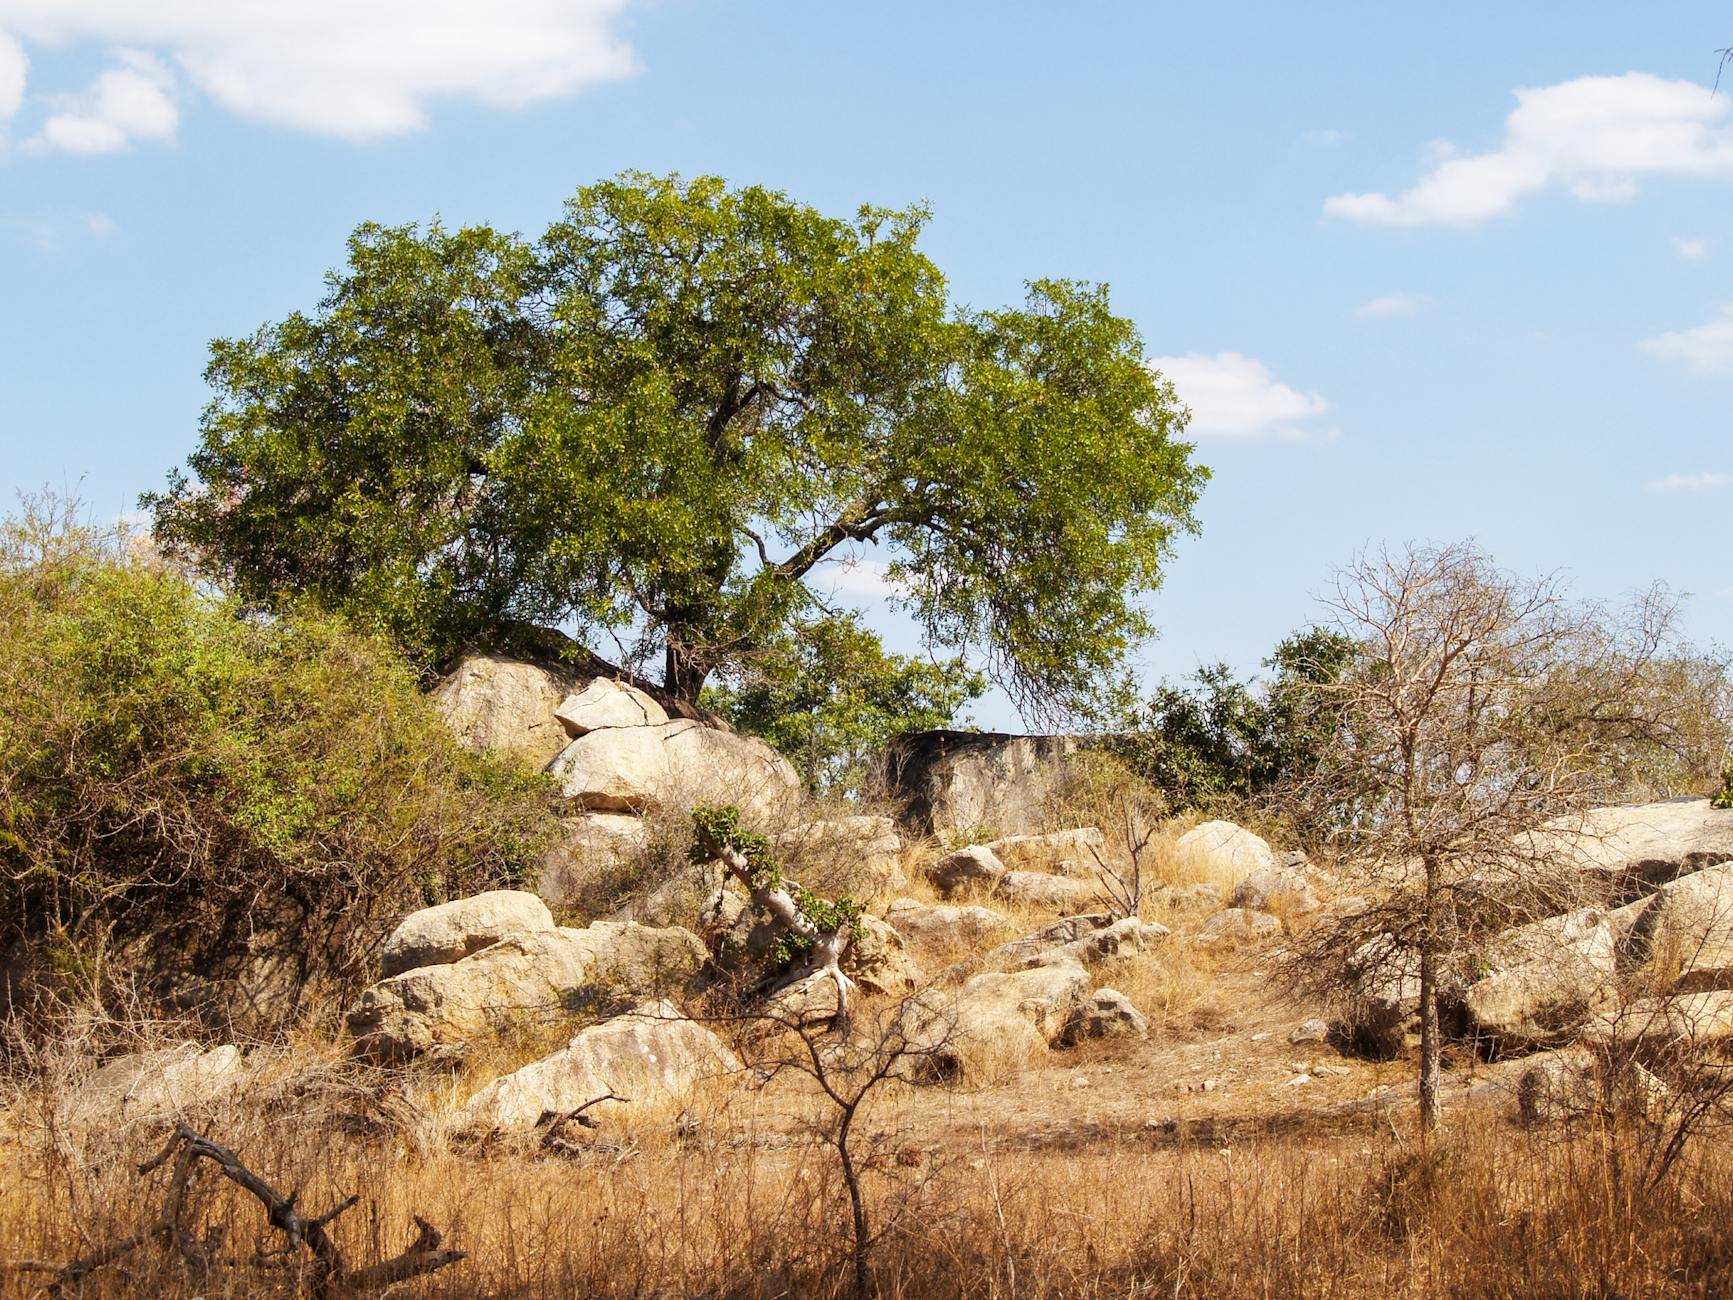 A green leafy tree stands tall in the middle of Africa's veldt, surrounded by rocks and dry brush—similar to Ray Bradbury's story.